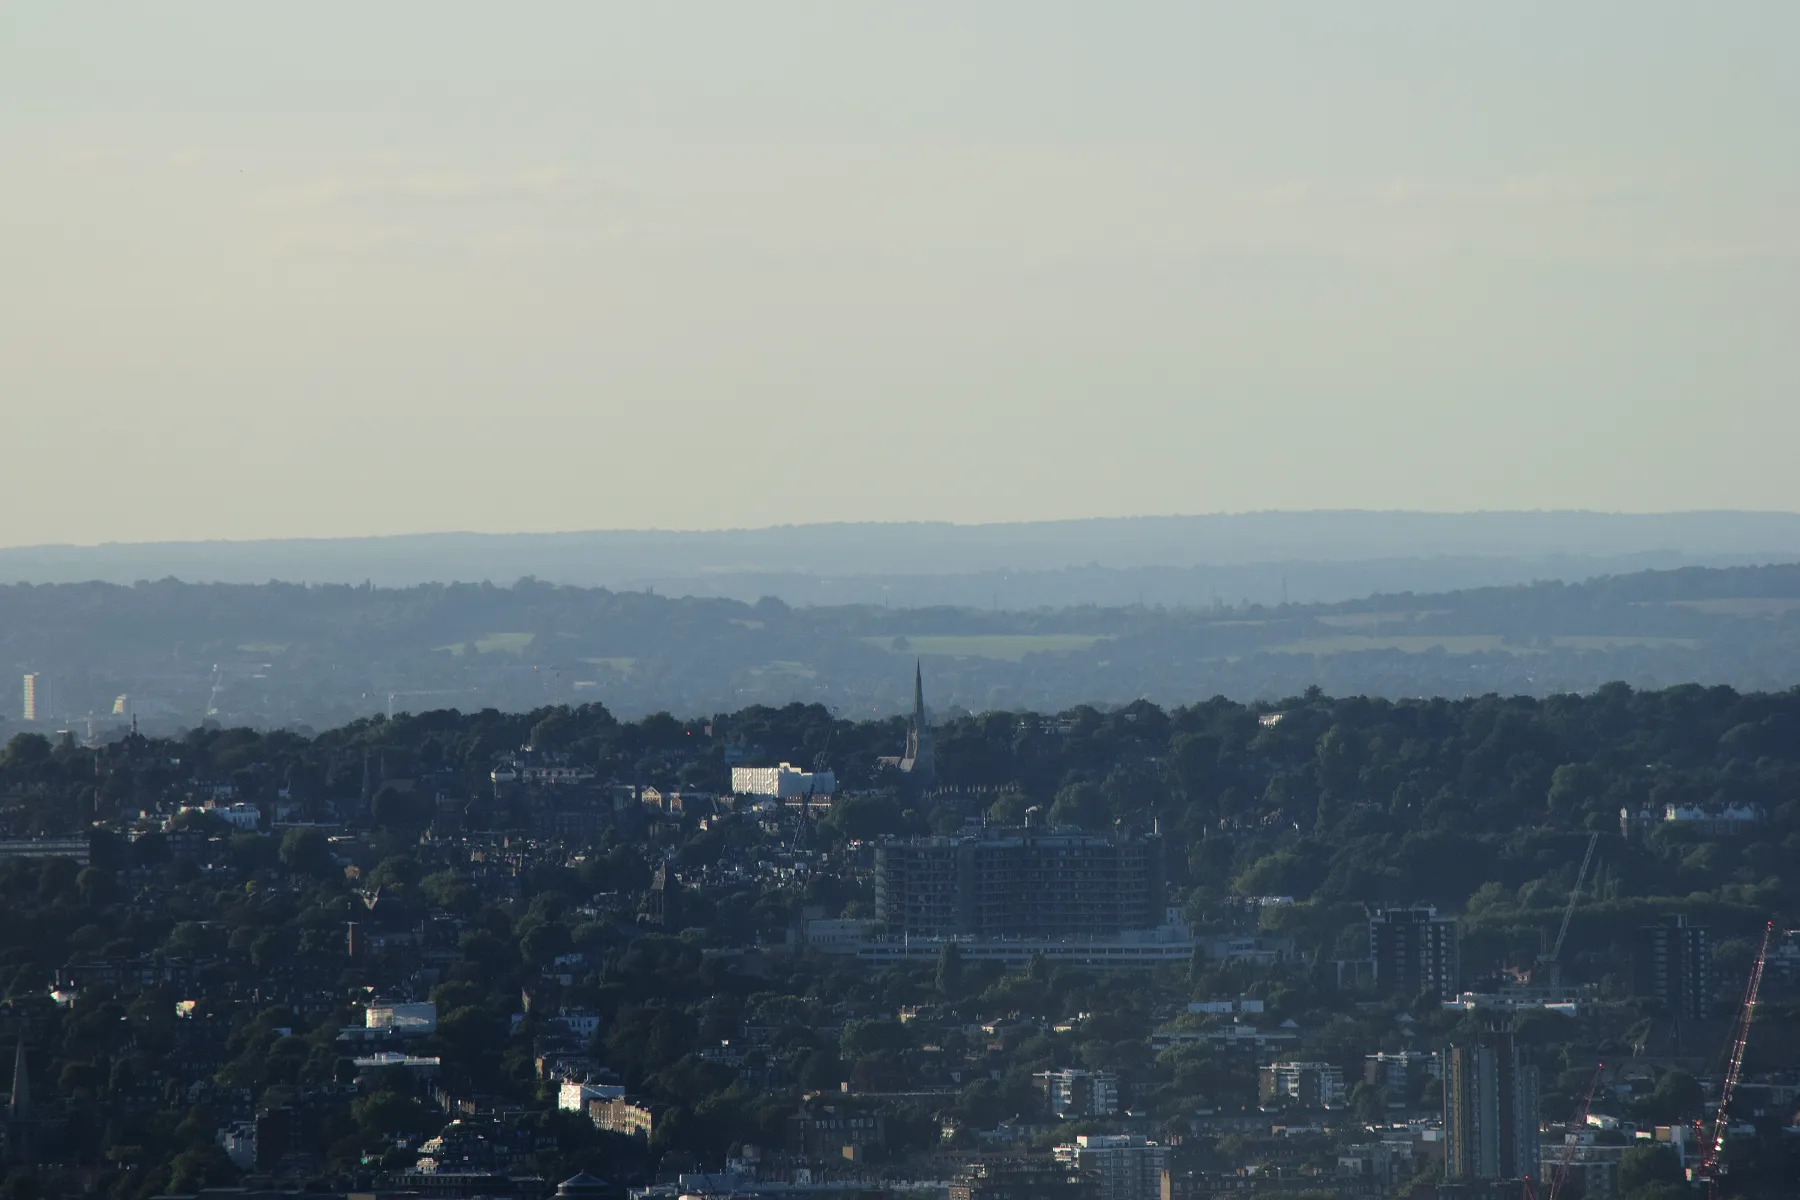 Coombe Hill and another Chiltern Hills seen from The Shard